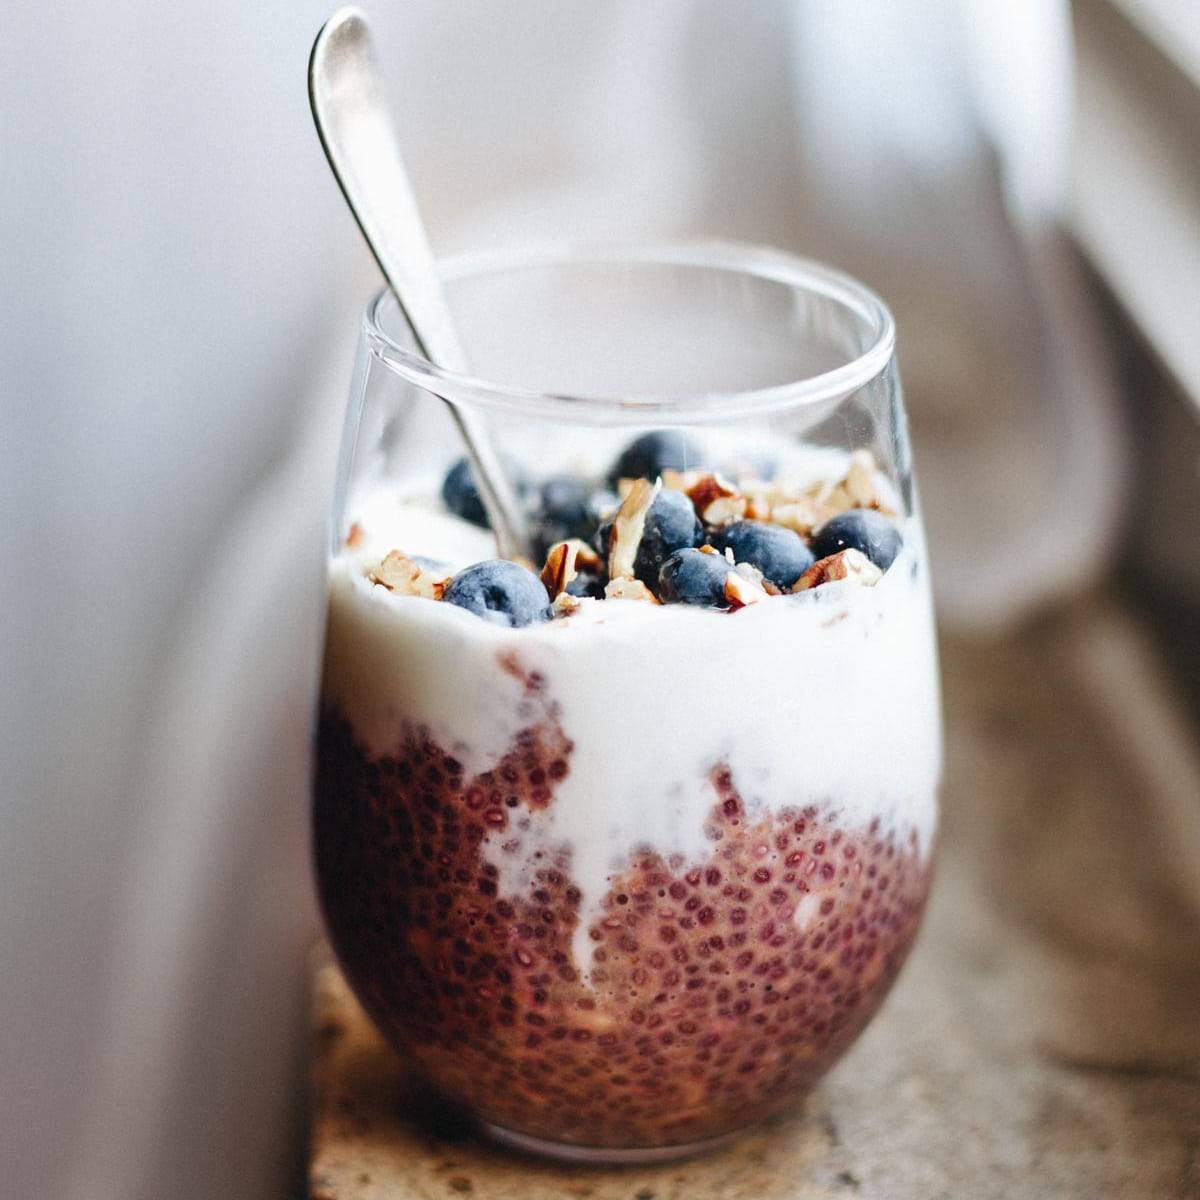 Berry, chia, and oats in a cup with a spoon